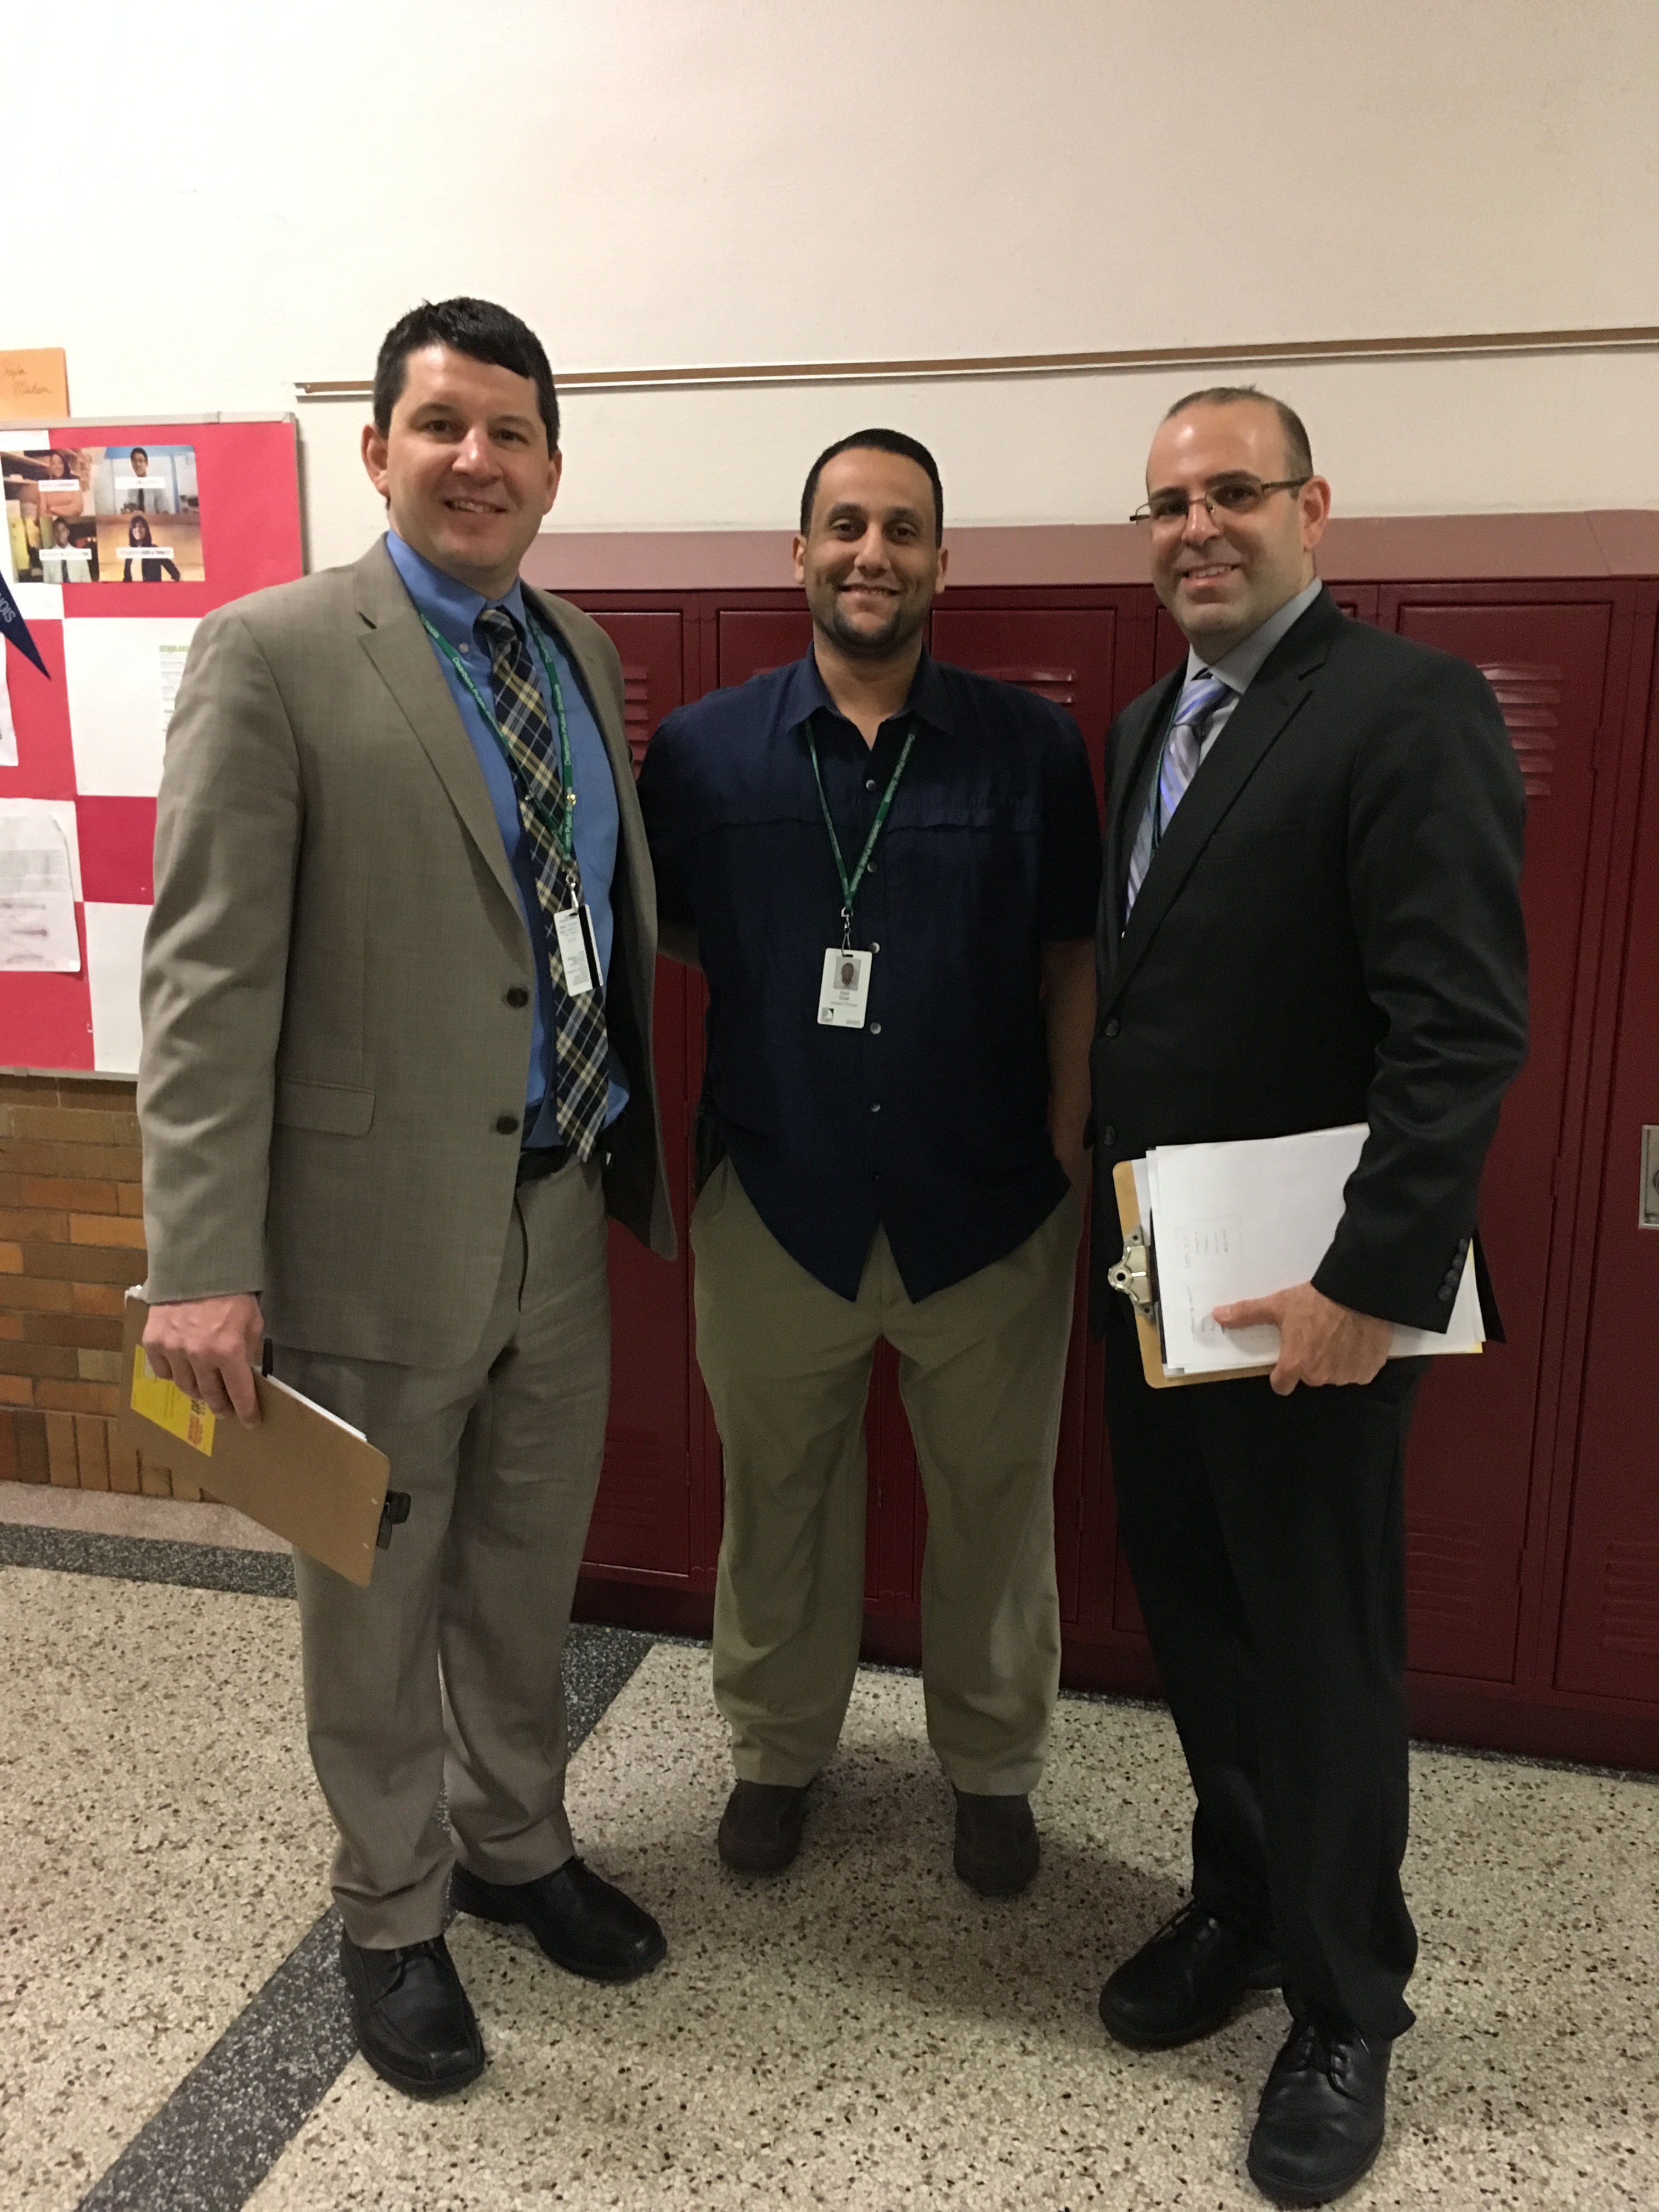 Dr. Maleyko visits Salina to conduct classroom walk-throughs with Mr. Lawera and Mr. Omar recently!